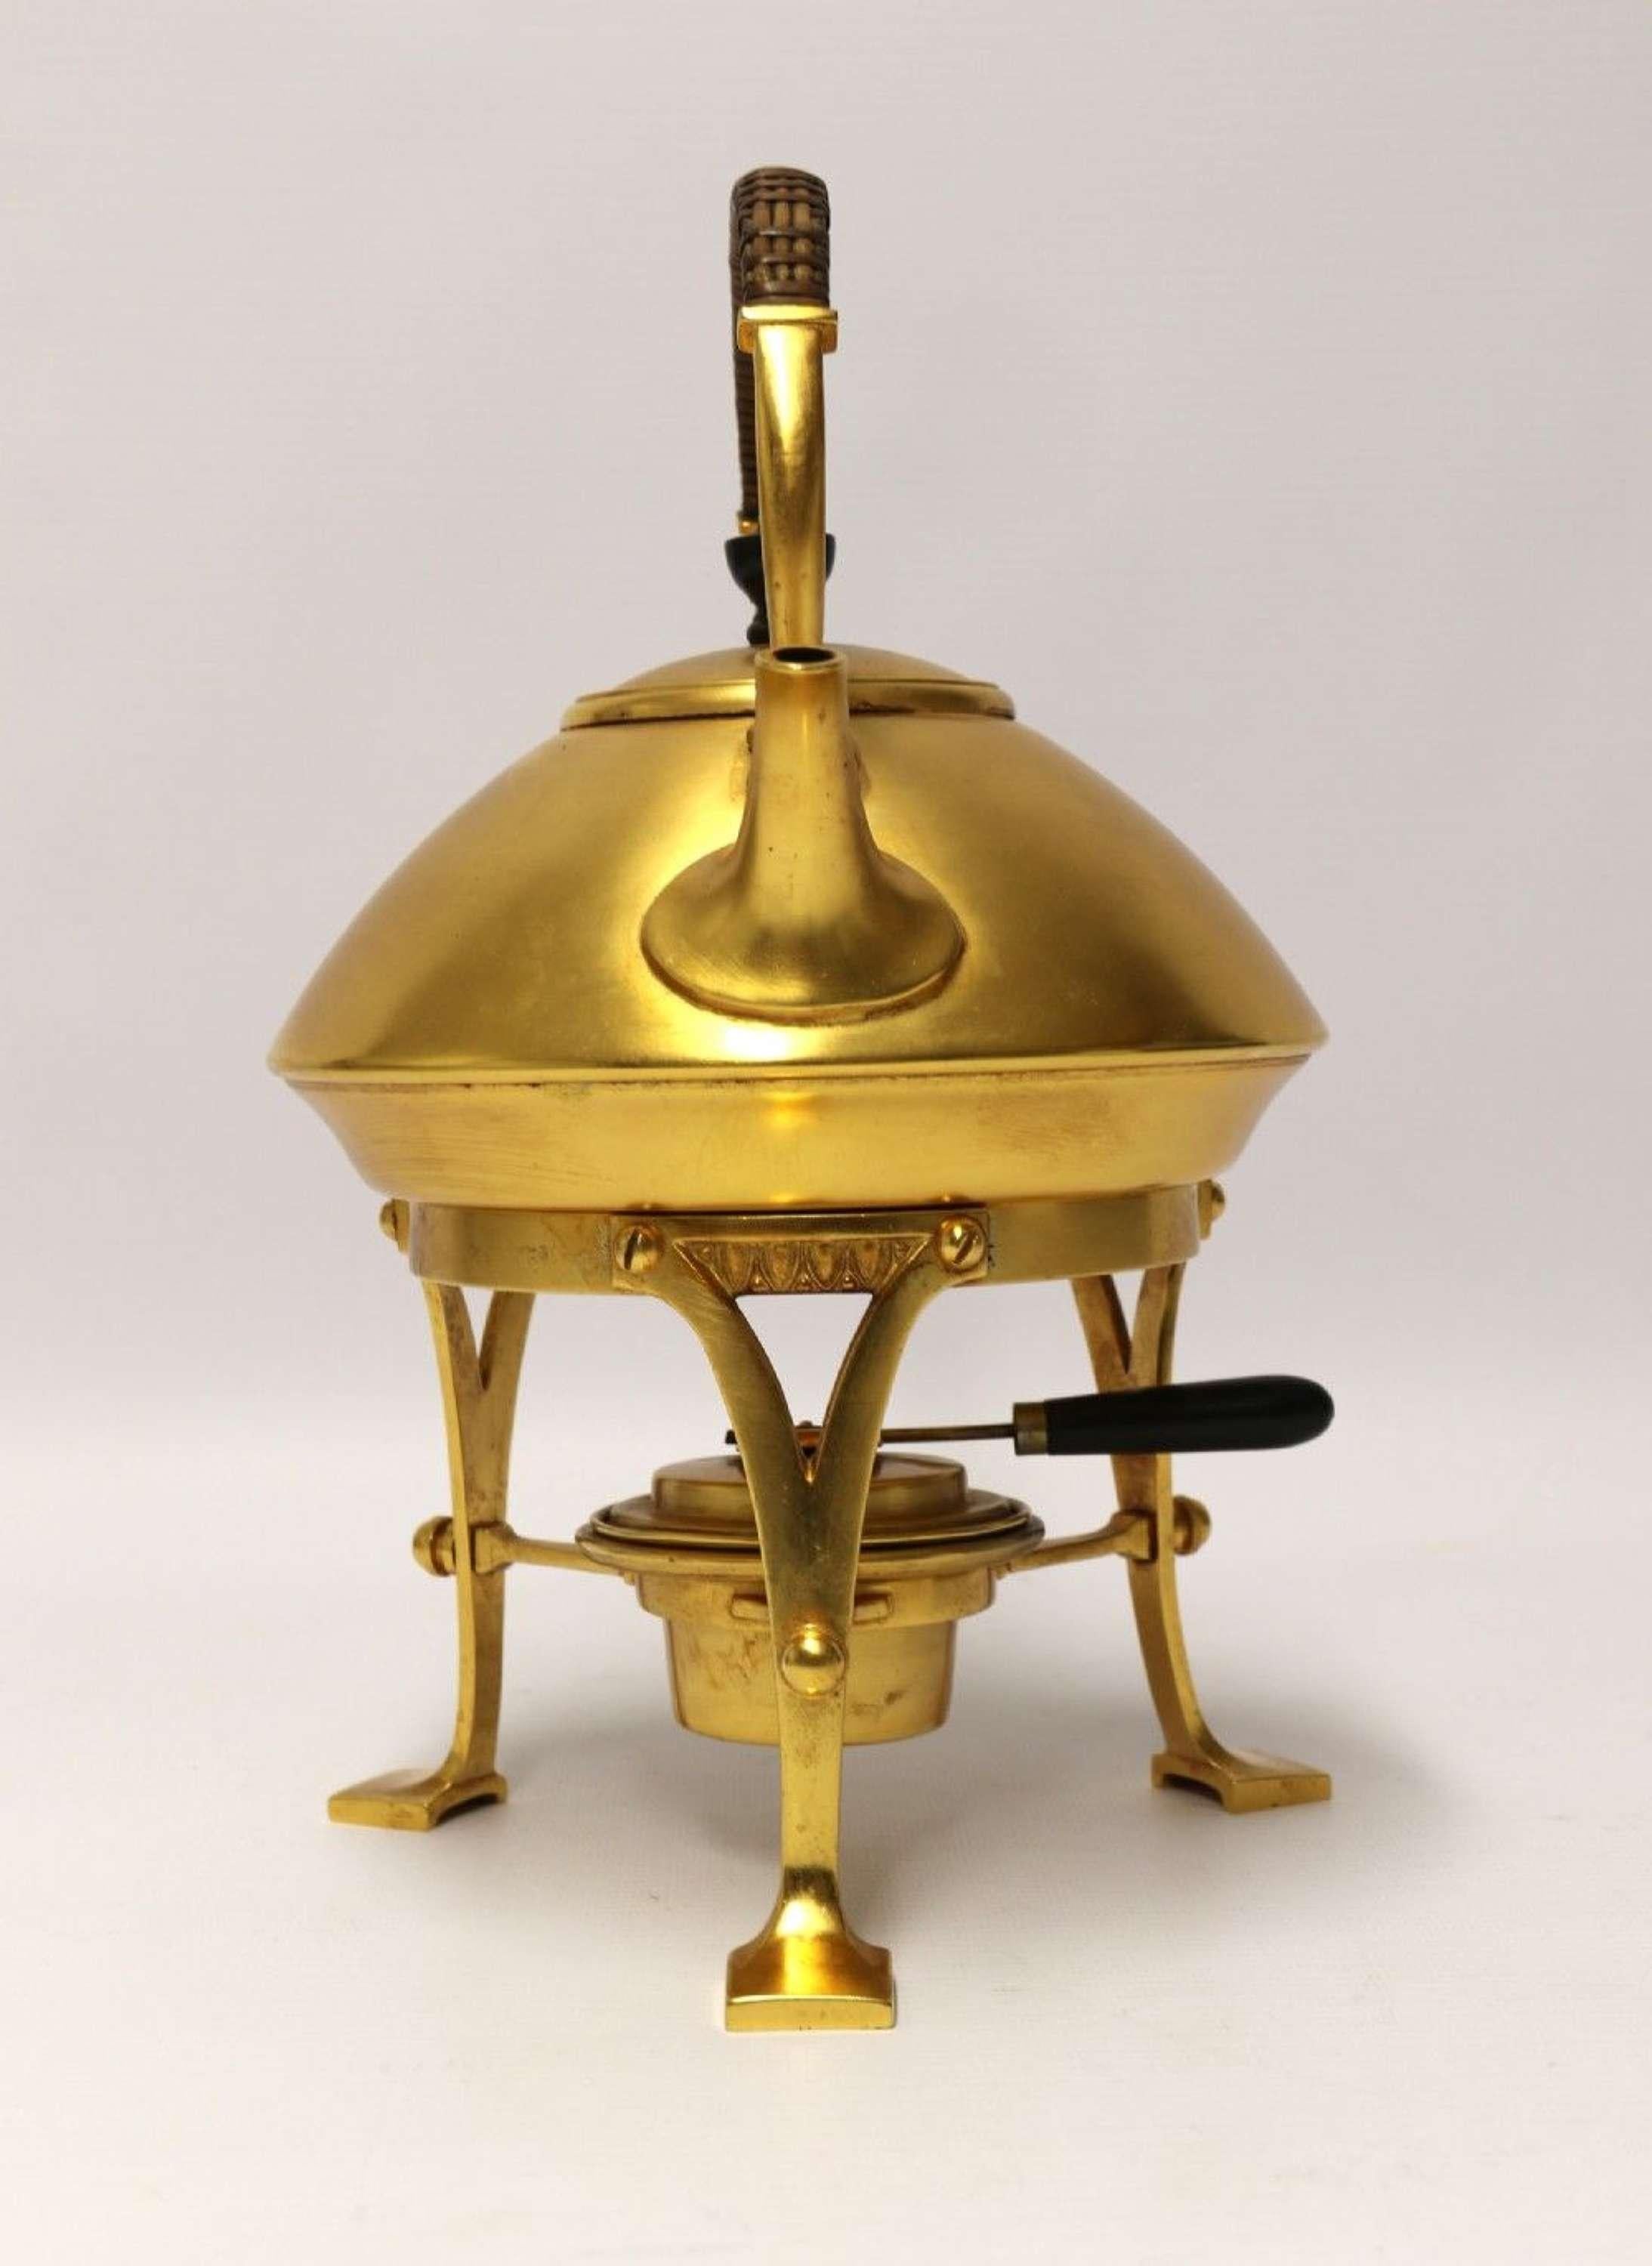 A 19th Century Aesthetic Movement Spirit Kettle

A late 19th century Aesthetic movement Spirit Kettle. This opulent and beautifully made piece is made from brass with gold plated surfaces which is in excellent condition. It is of a wonderful design,